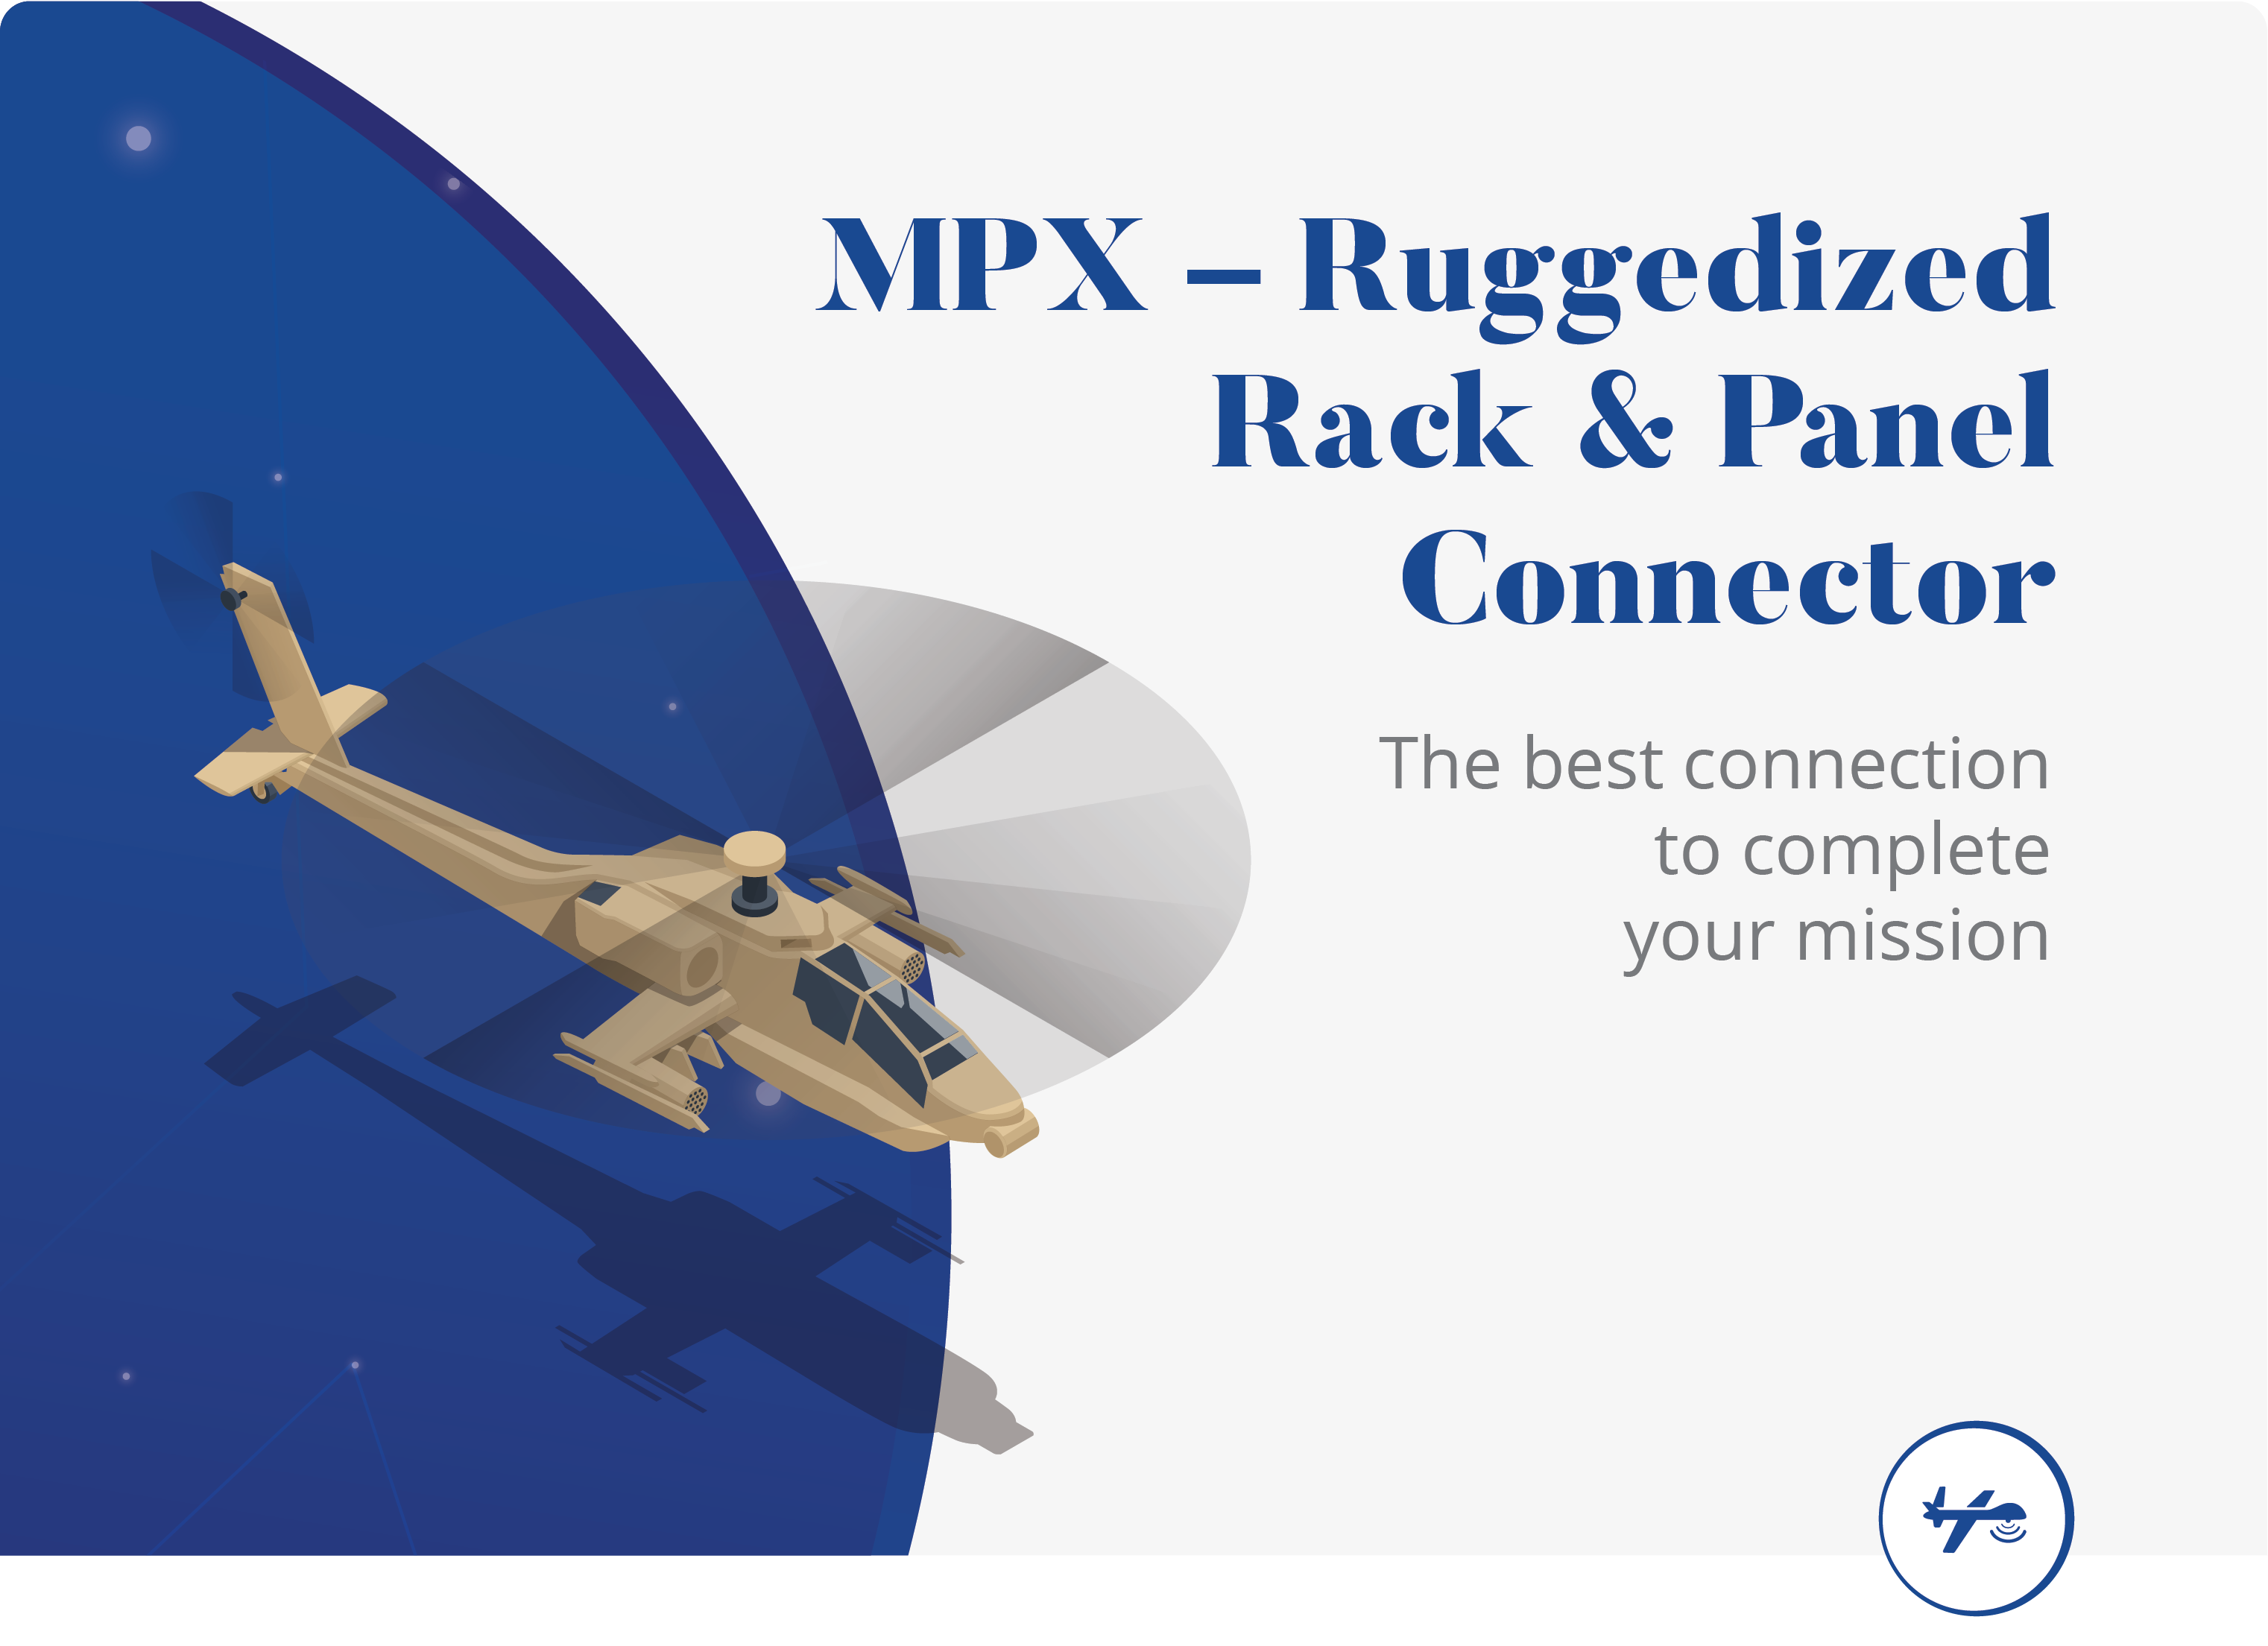 MPX: Ruggedized Rack & Panel Connector